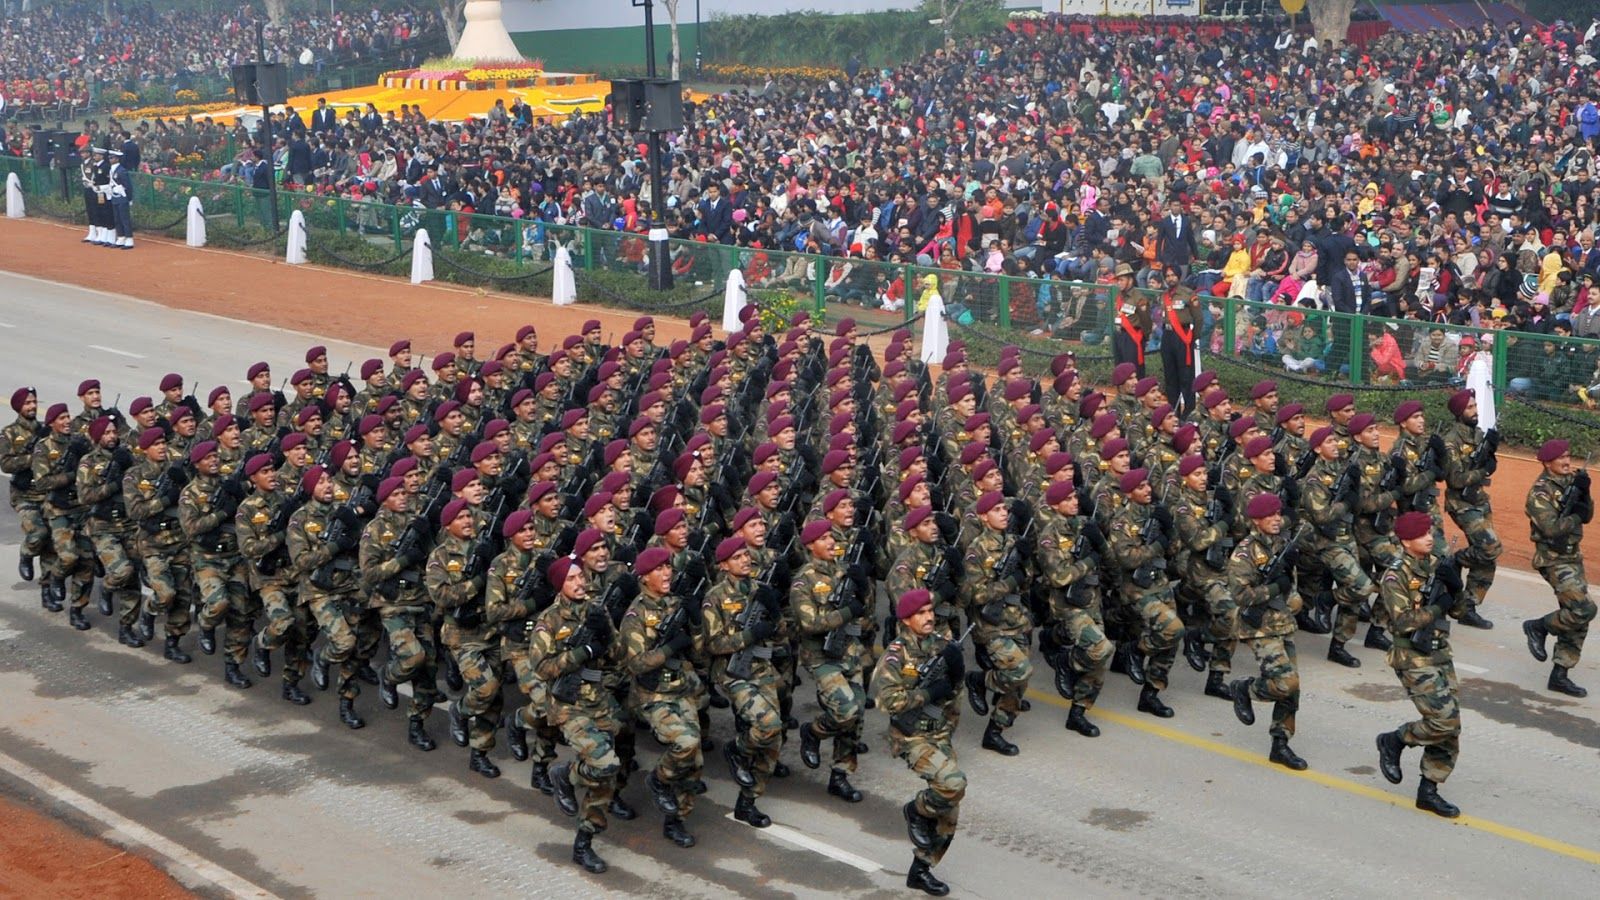 Army HD Wallpaper Image Latest Army Full HD Picture Army Republic Day Parade 2018